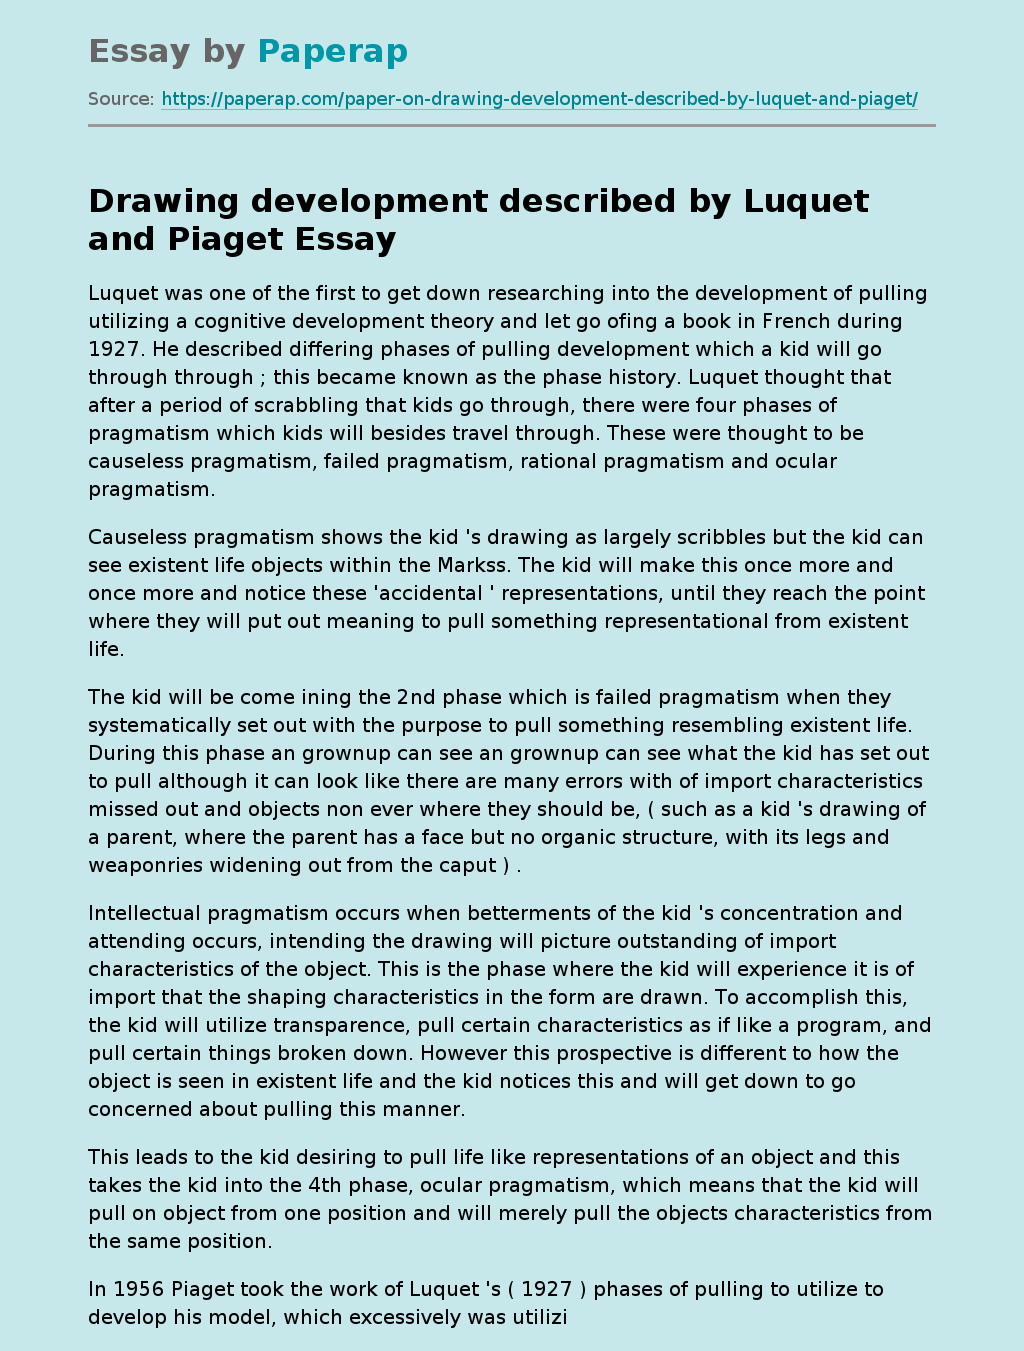 Drawing development described by Luquet and Piaget